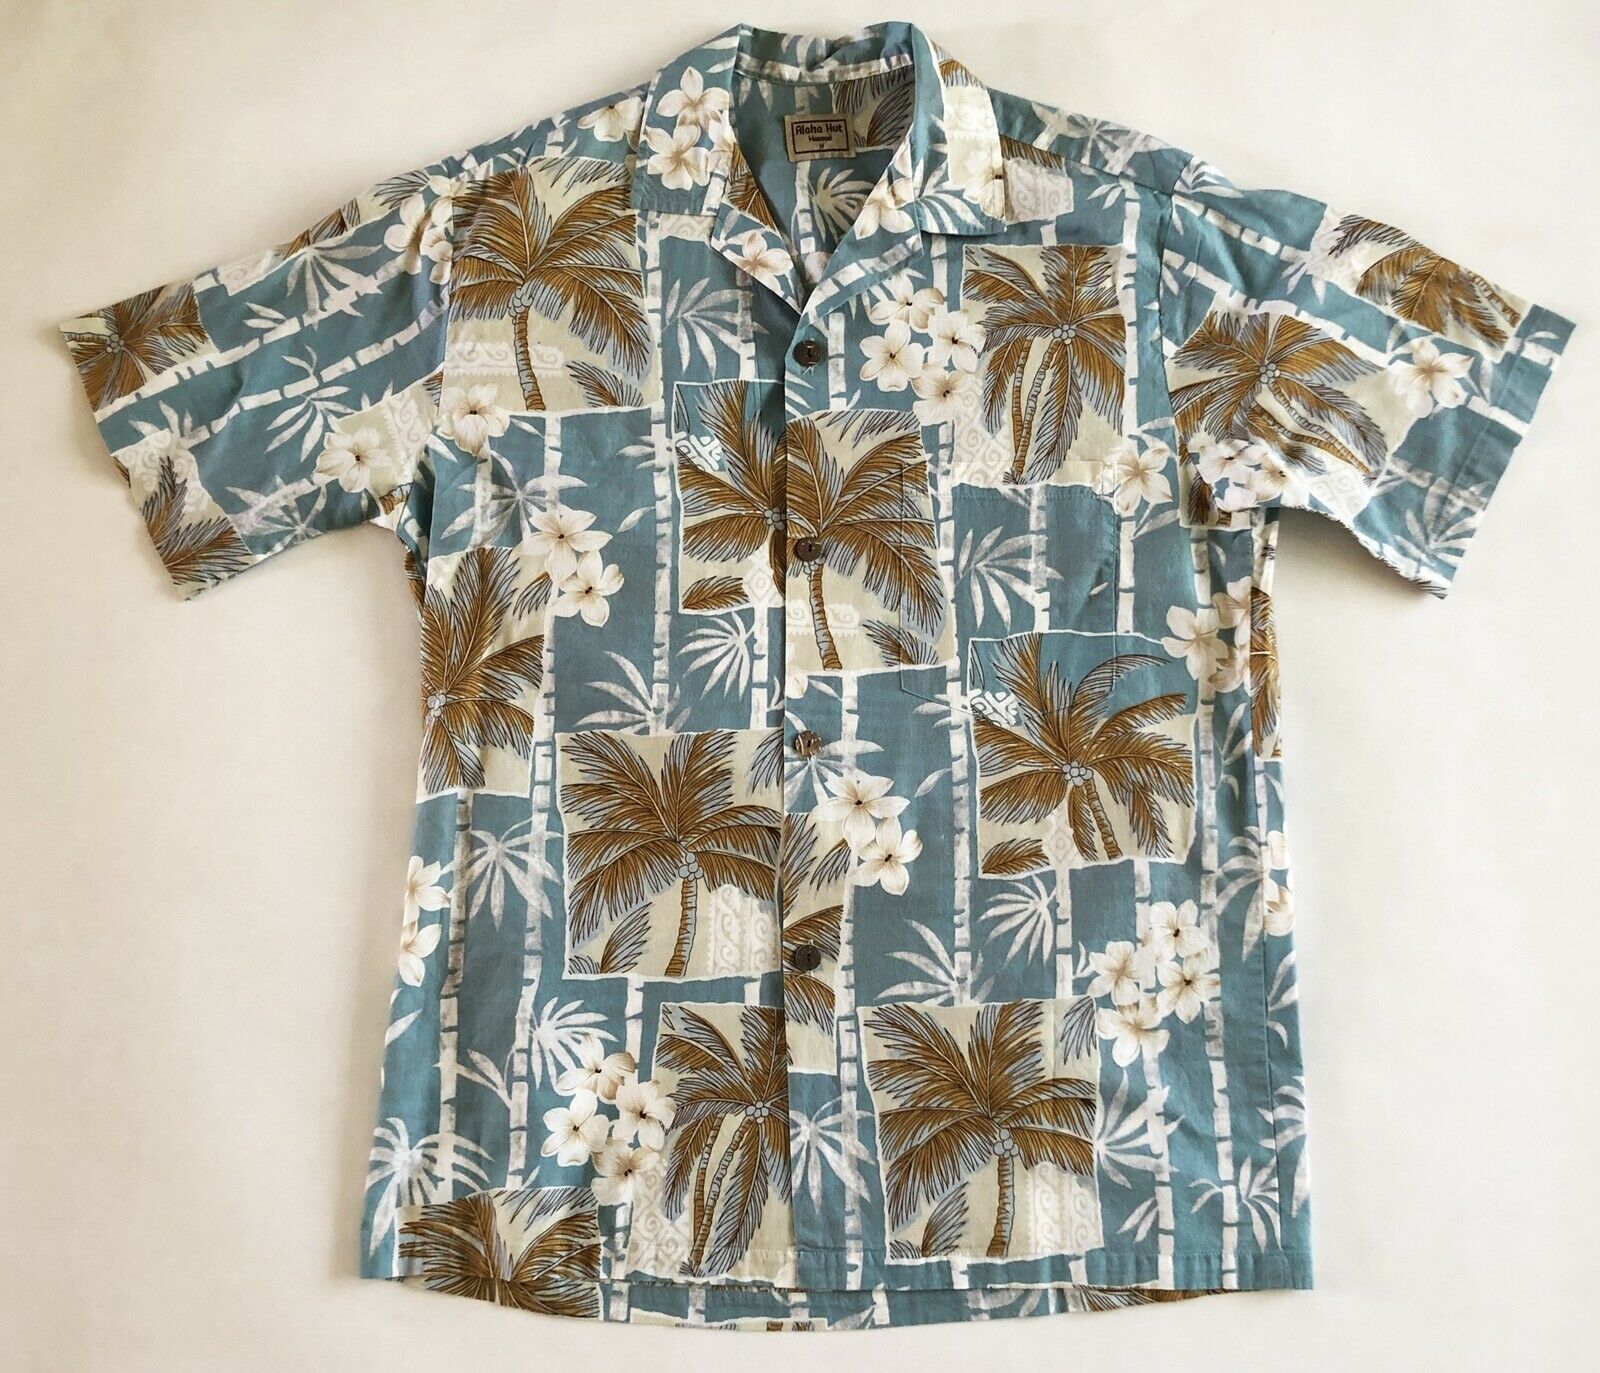 Primary image for Vintage Aloha Hut Hawaii Hawaiian Shirt Size M Coconut Shell Buttons Cotton